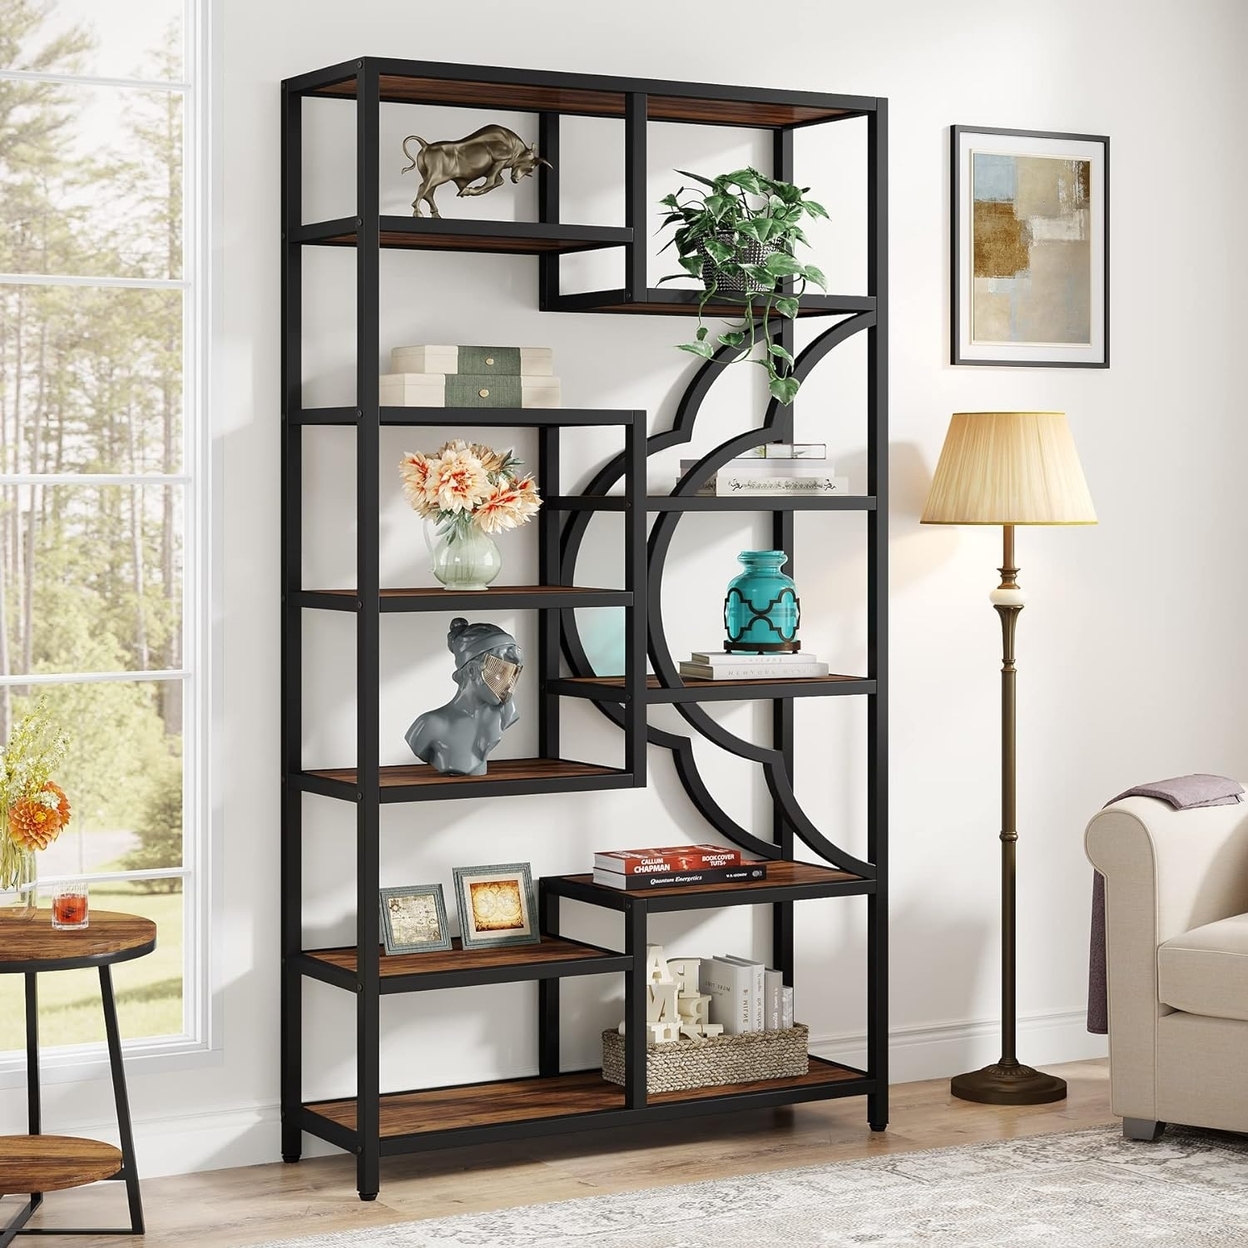 Tribesigns Bookshelf, 11-Shelves Tall Bookcase With Unique Arc-Shaped Design, Industrial Etagere Display Storage Shelves - 1pc